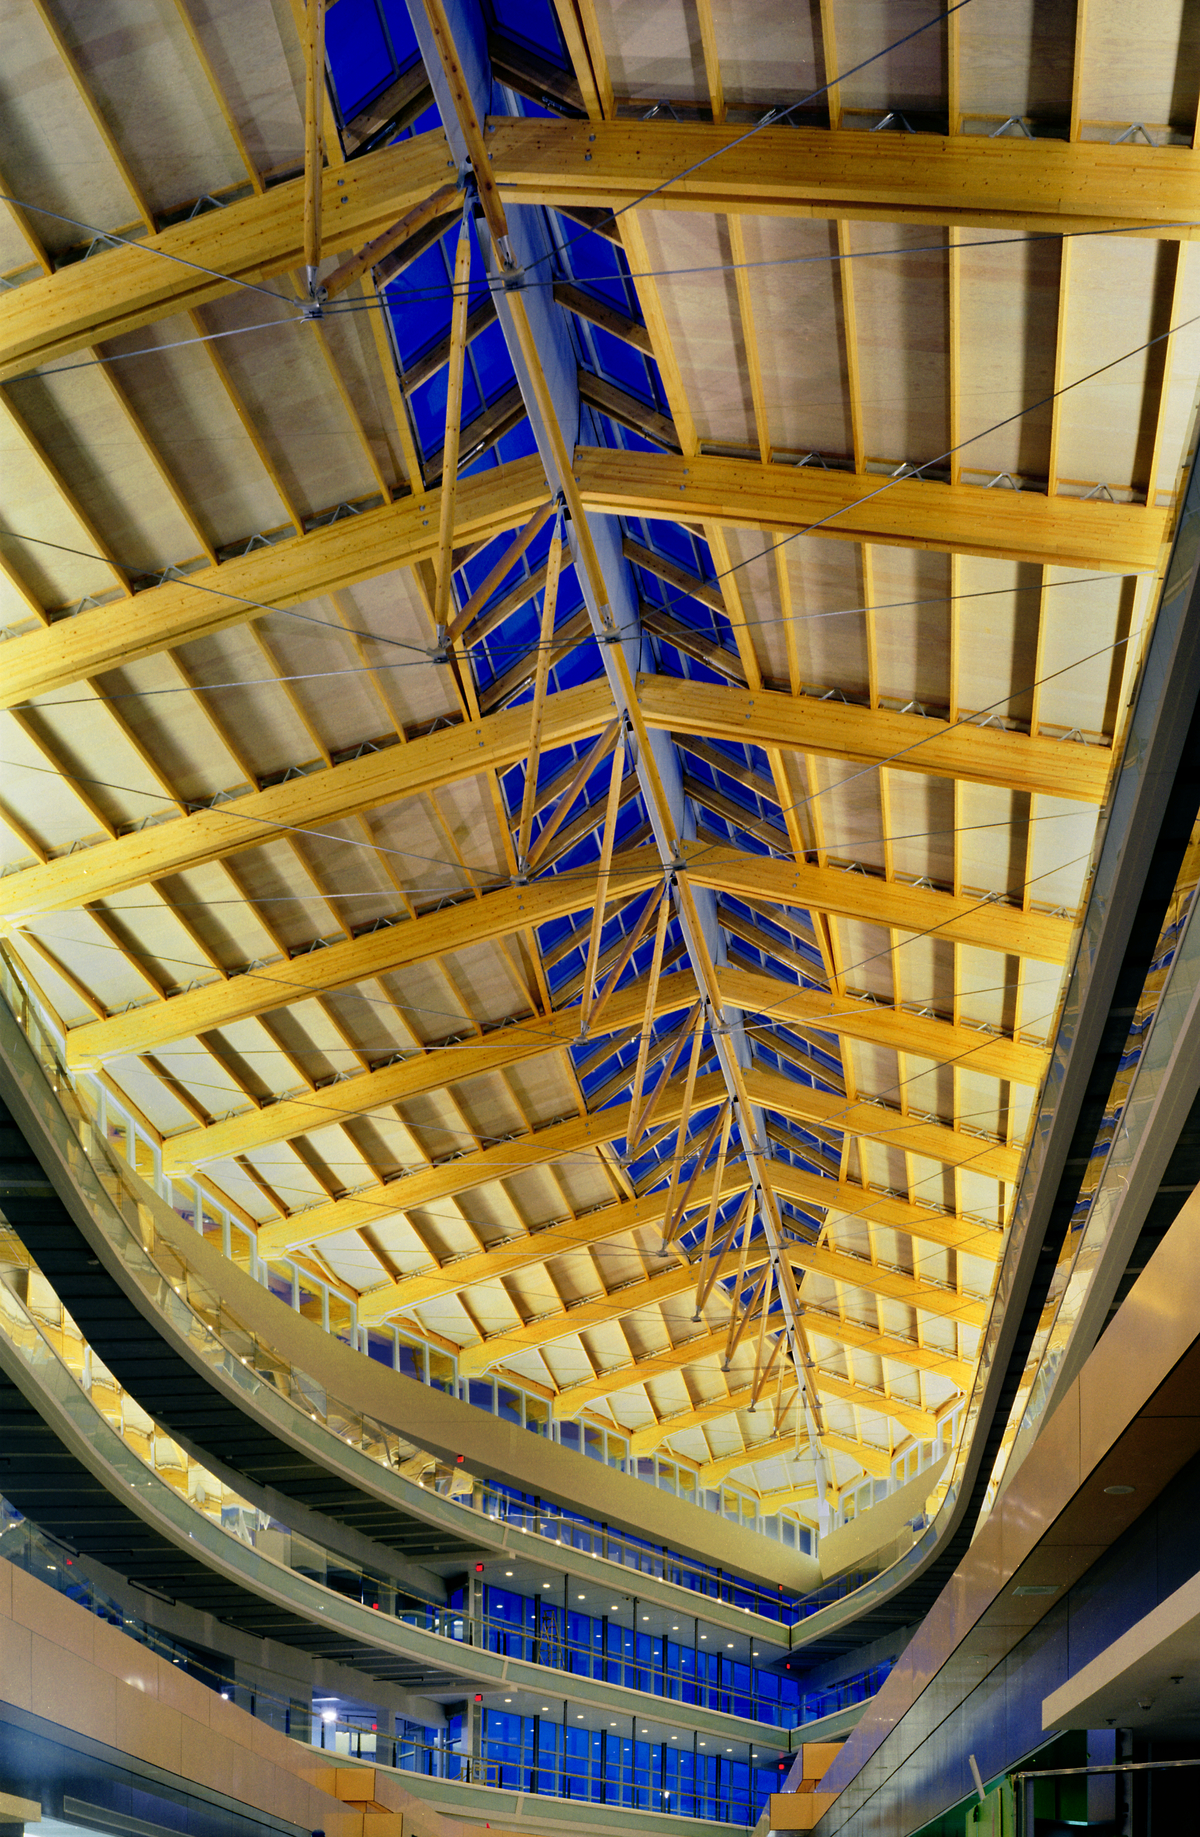 Interior evening view of Surrey Central City ceiling structure showing steel tensioning cables, glue-laminated timber (Glulam) beams, and central glass and wood ridge